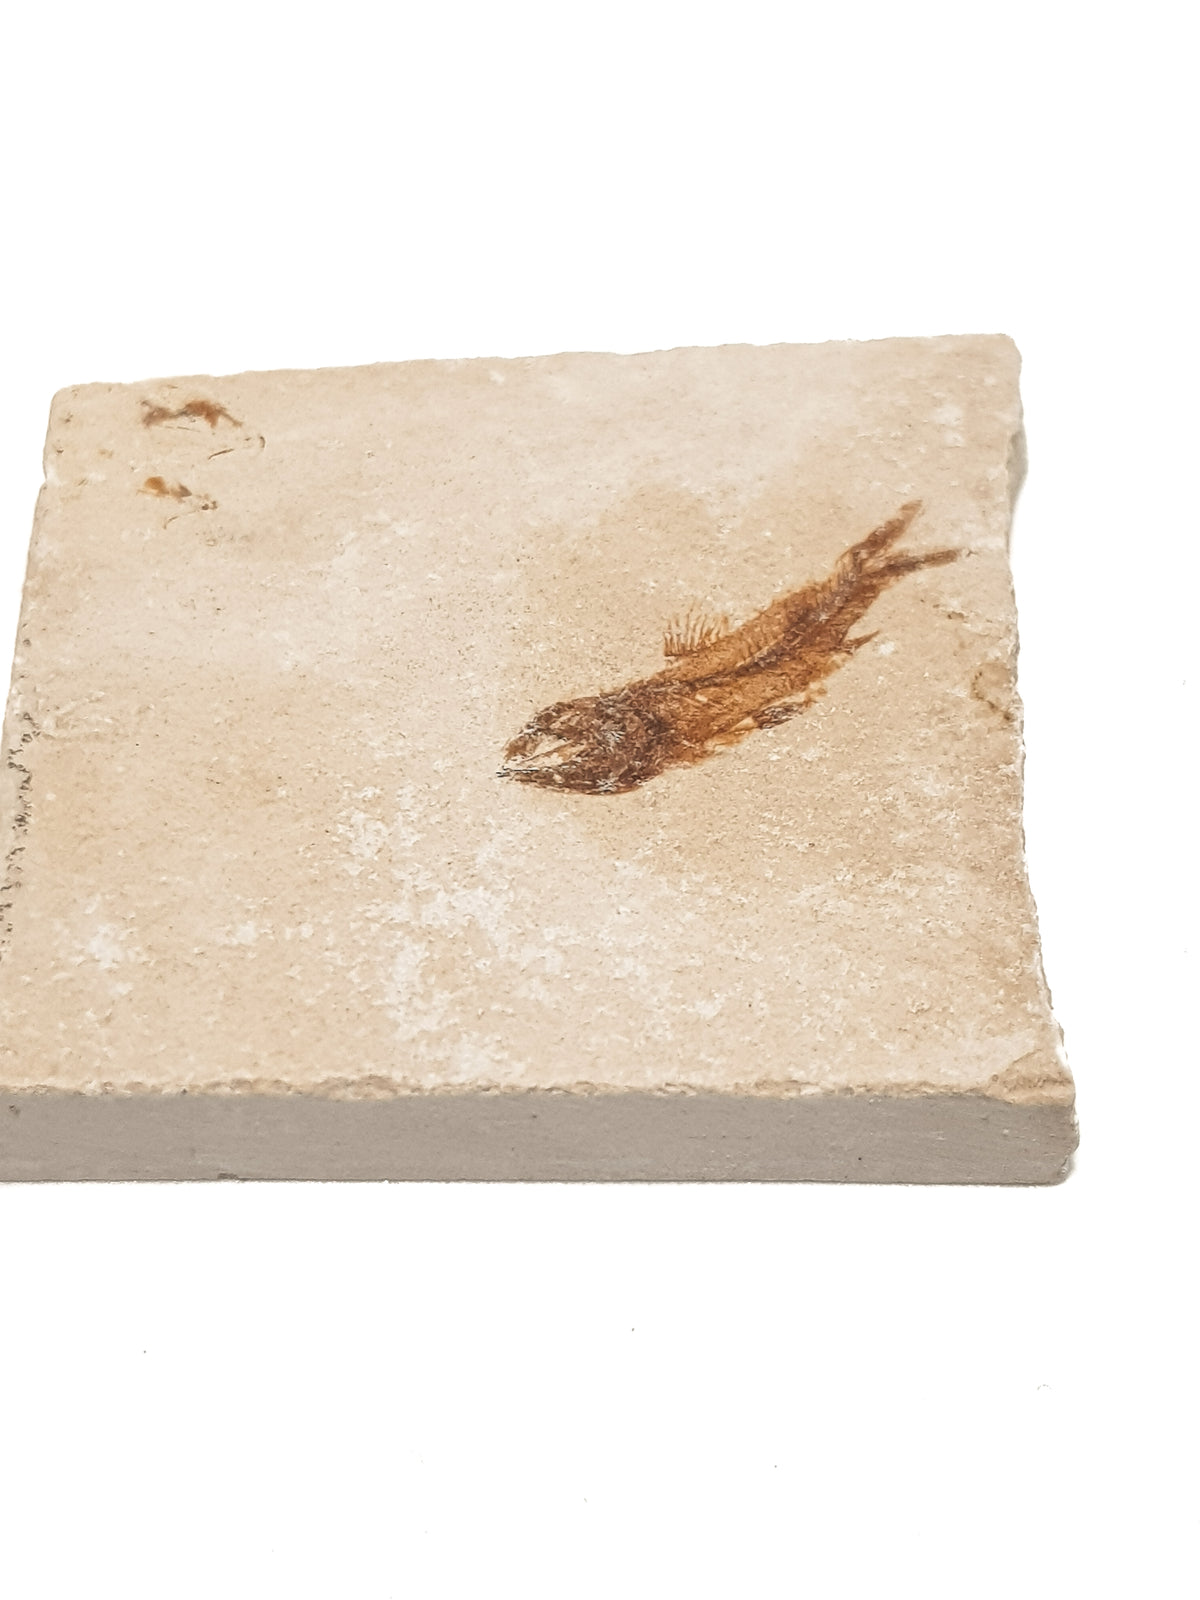 fossil fish in limestone. the limestone is pale and creamy. the fish is detailed, bot the bones and flesh are dark brown. the fish is lying diagonally across the stone and looks like it is diving downwards